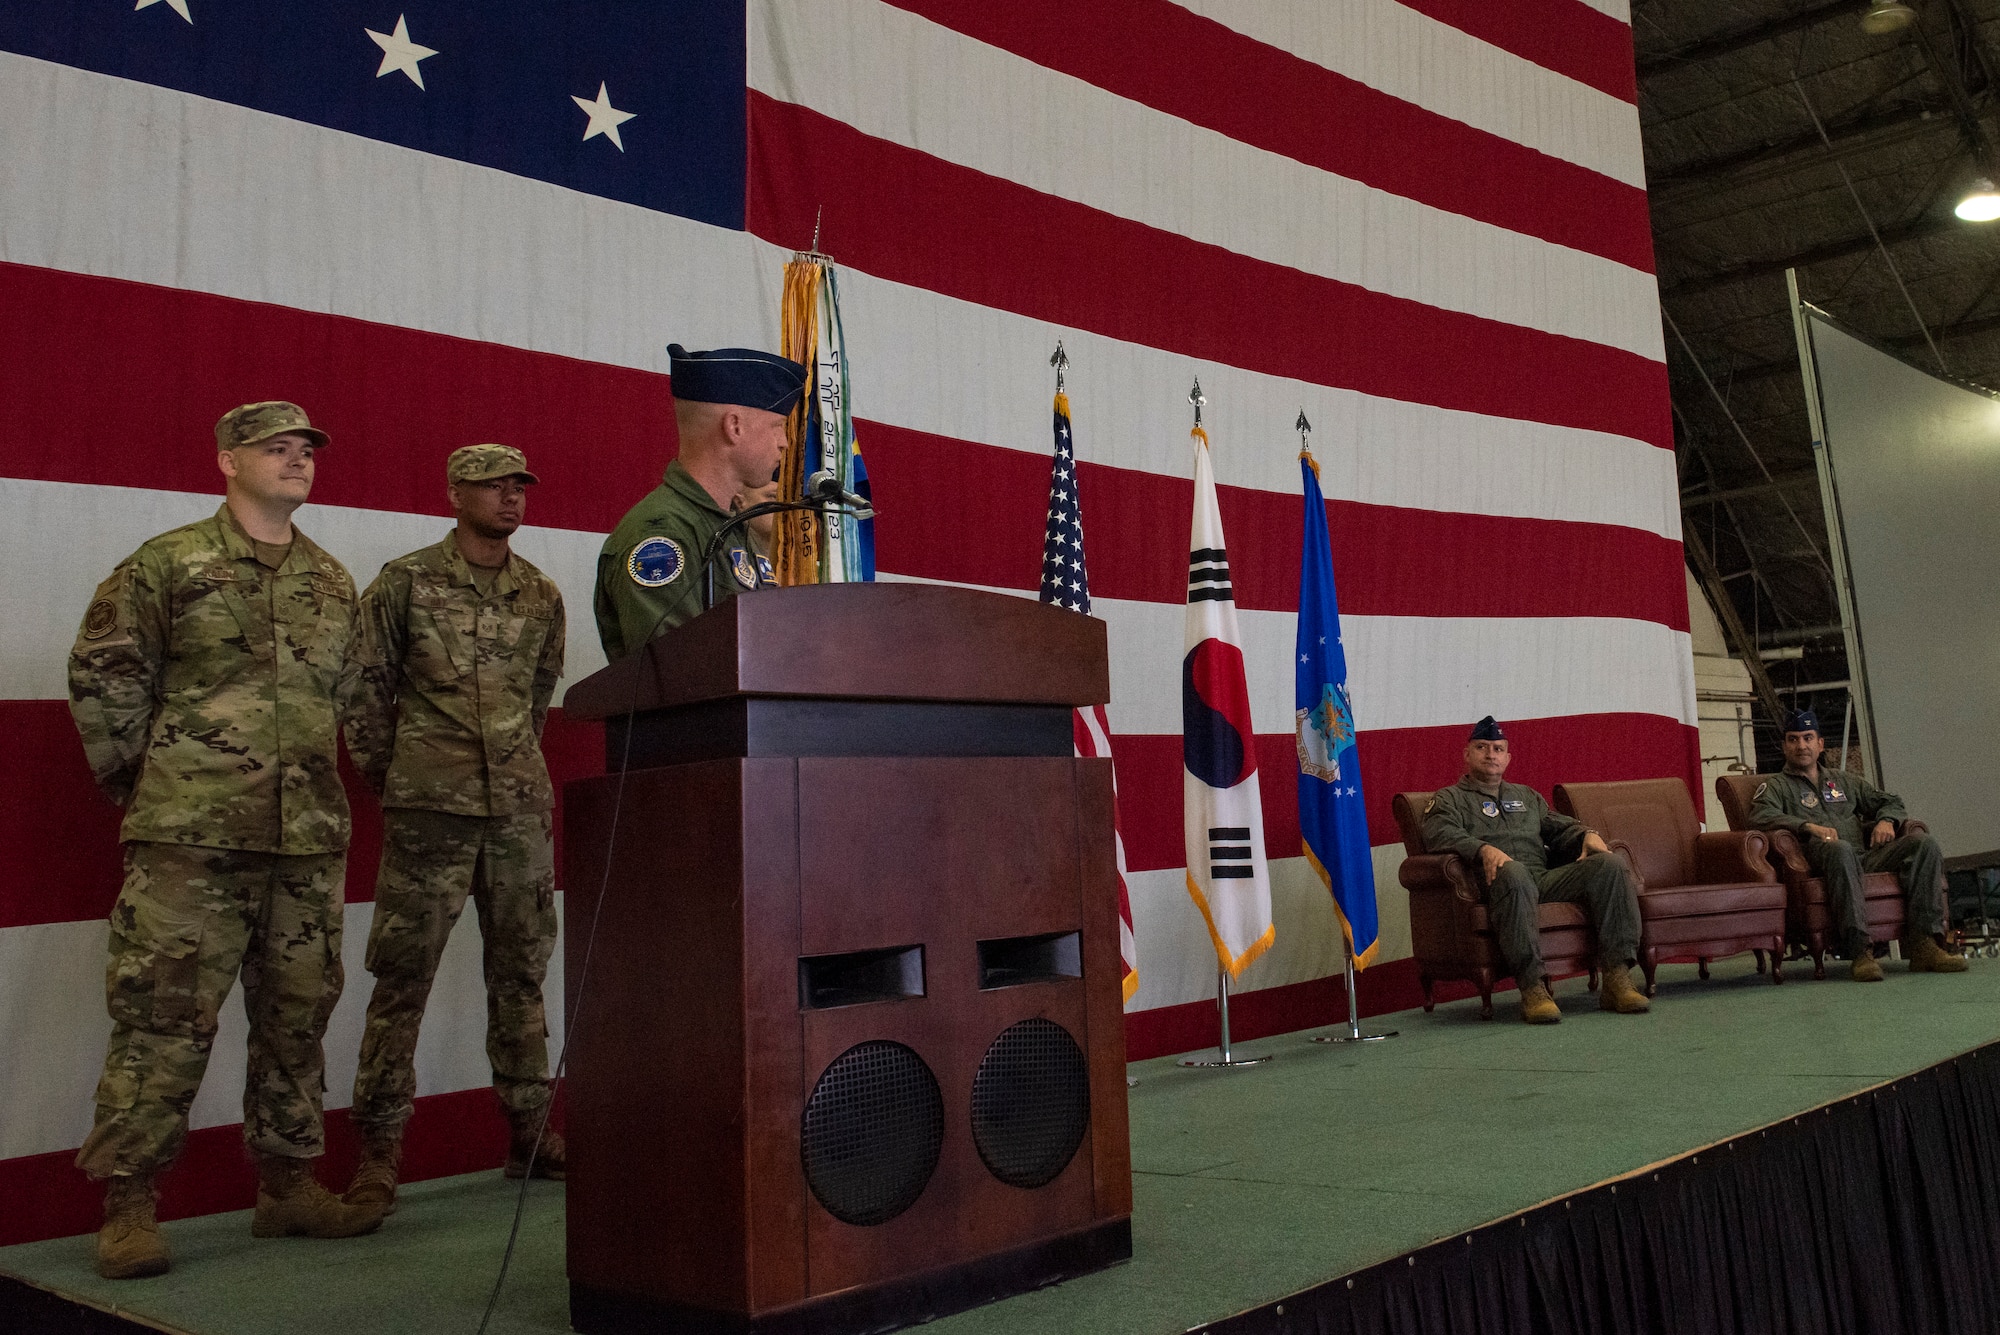 51st Operations Group held a change of command ceremony at Osan Air Base, Republic of Korea, May 28, 2021. Col. David Raymond transferred command of the 51st OG to Col. Matthew Gaetke.